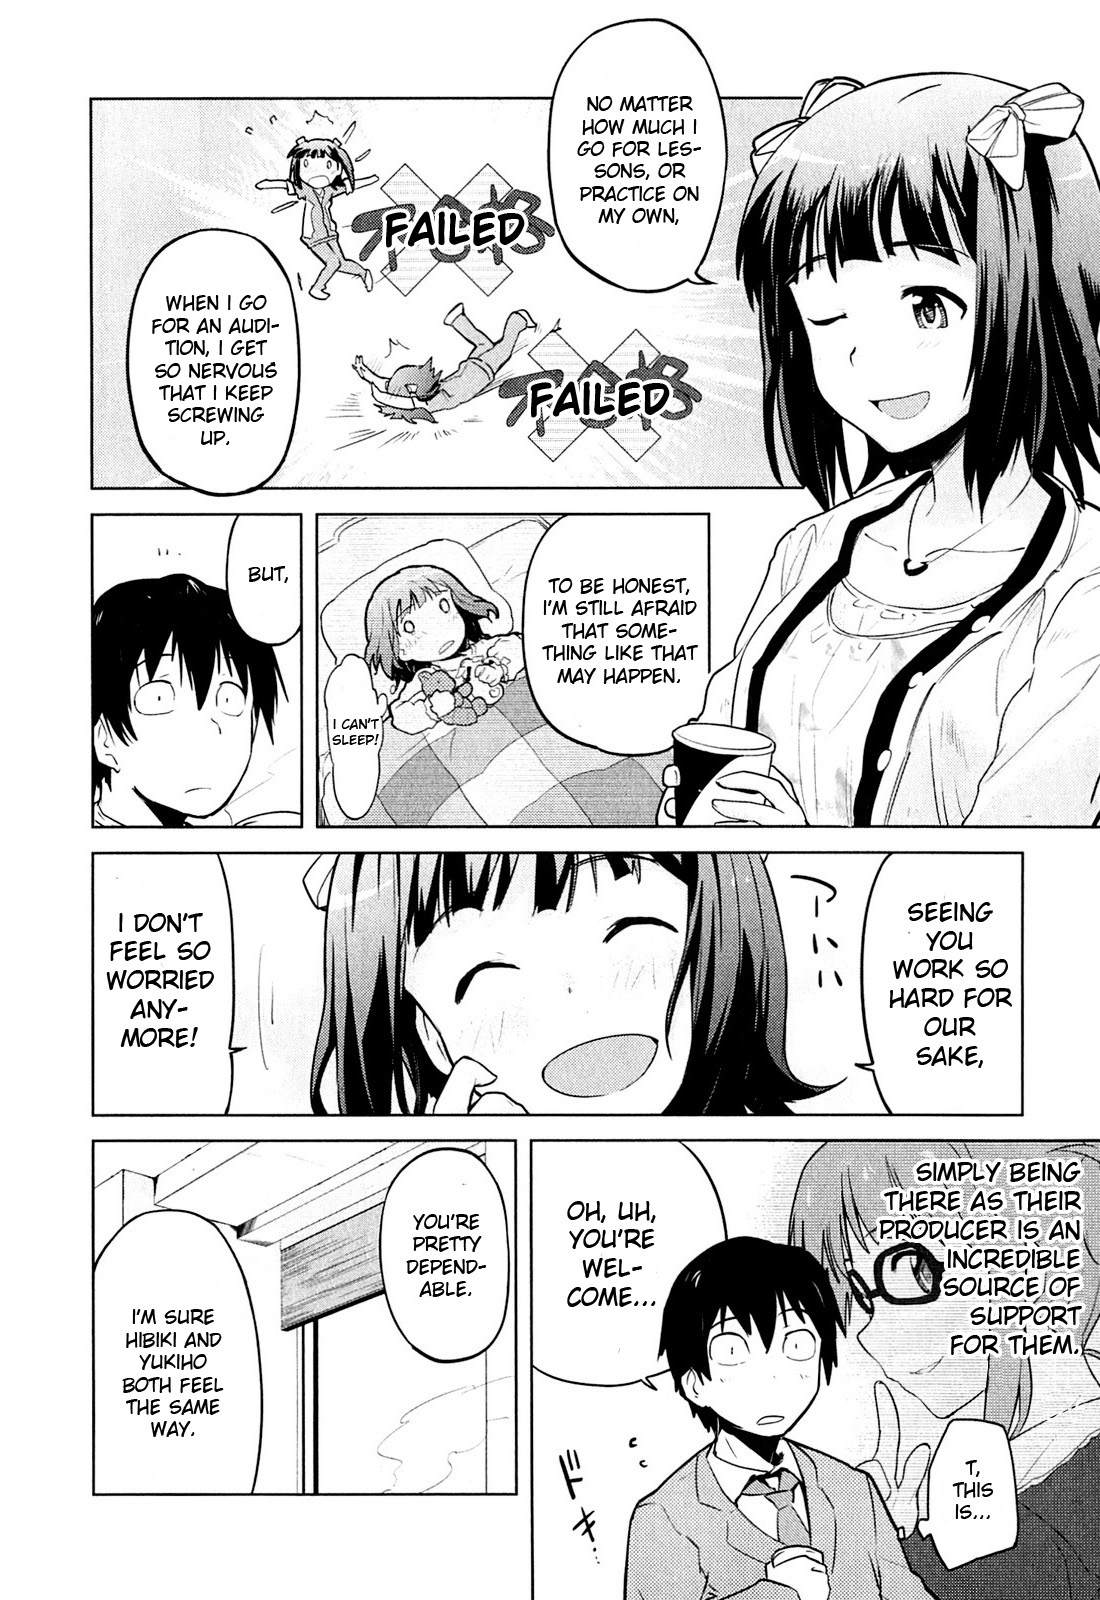 THE iDOLM@STER 2 The world is all one!! Vol. 1 Ch. 4 SprouT